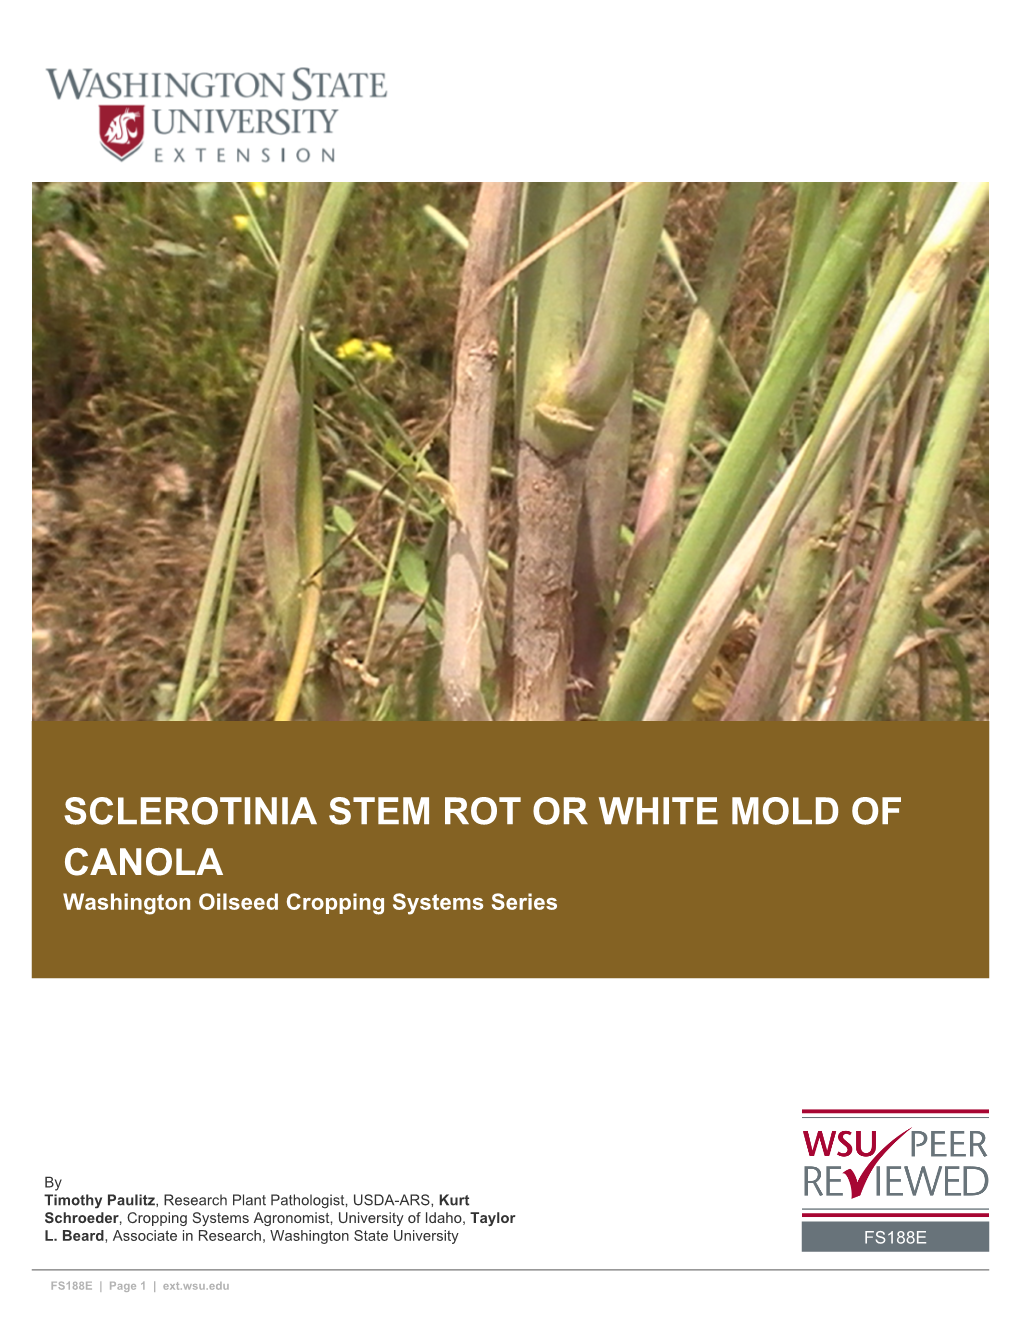 SCLEROTINIA STEM ROT OR WHITE MOLD of CANOLA Washington Oilseed Cropping Systems Series